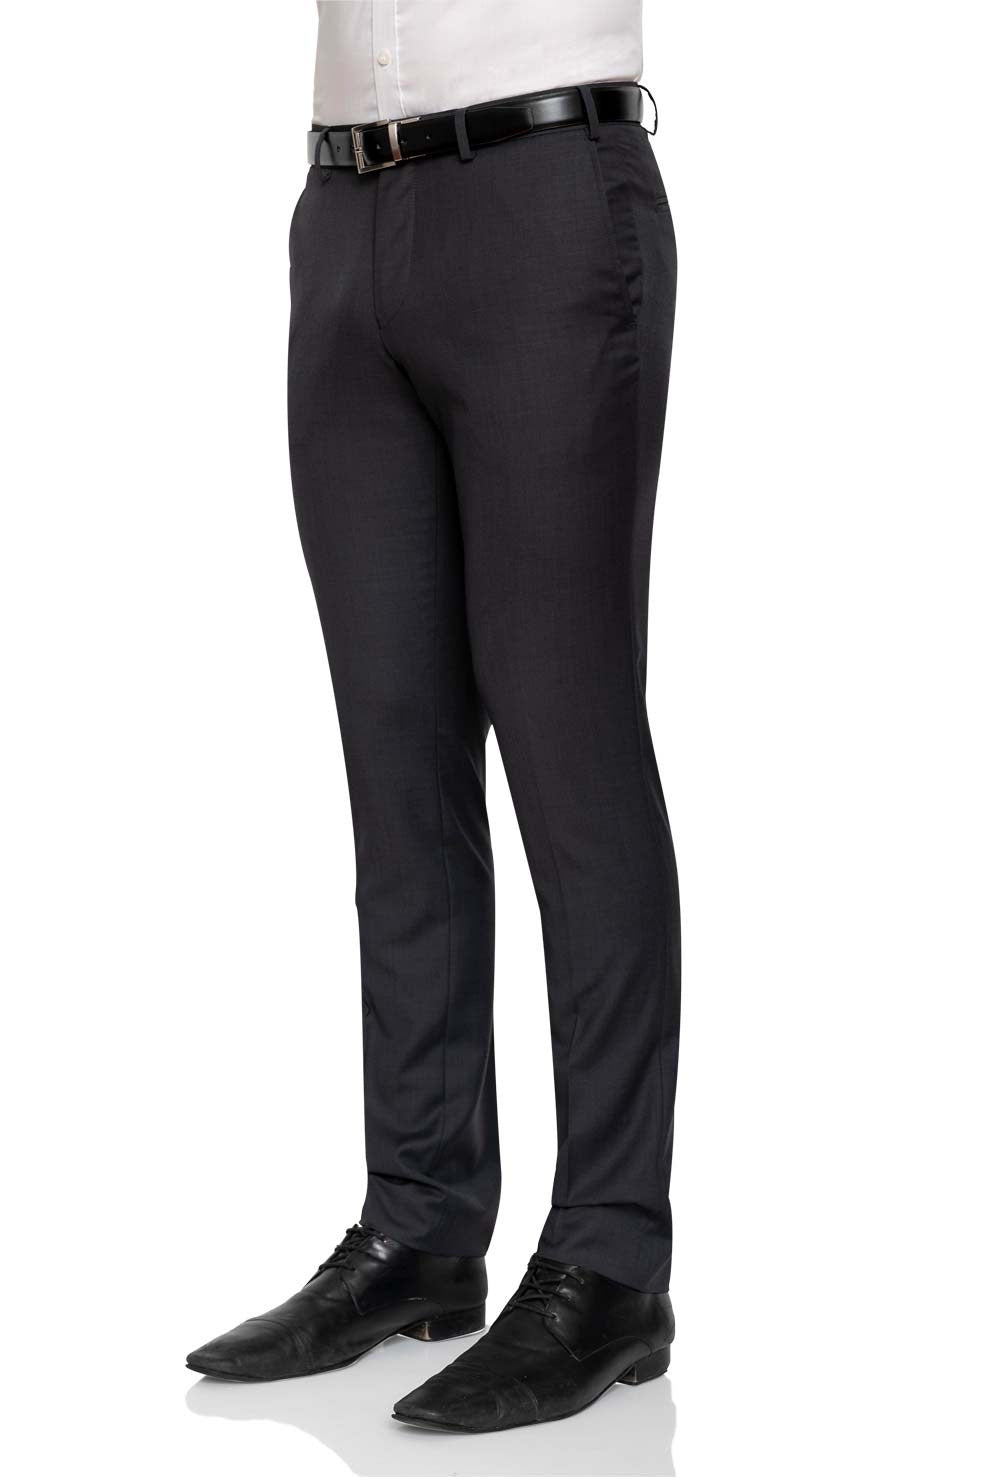 Stvdio by Jeff Banks Grey Puppytooth Tailored Fit Suit Trouser | Jeff Banks